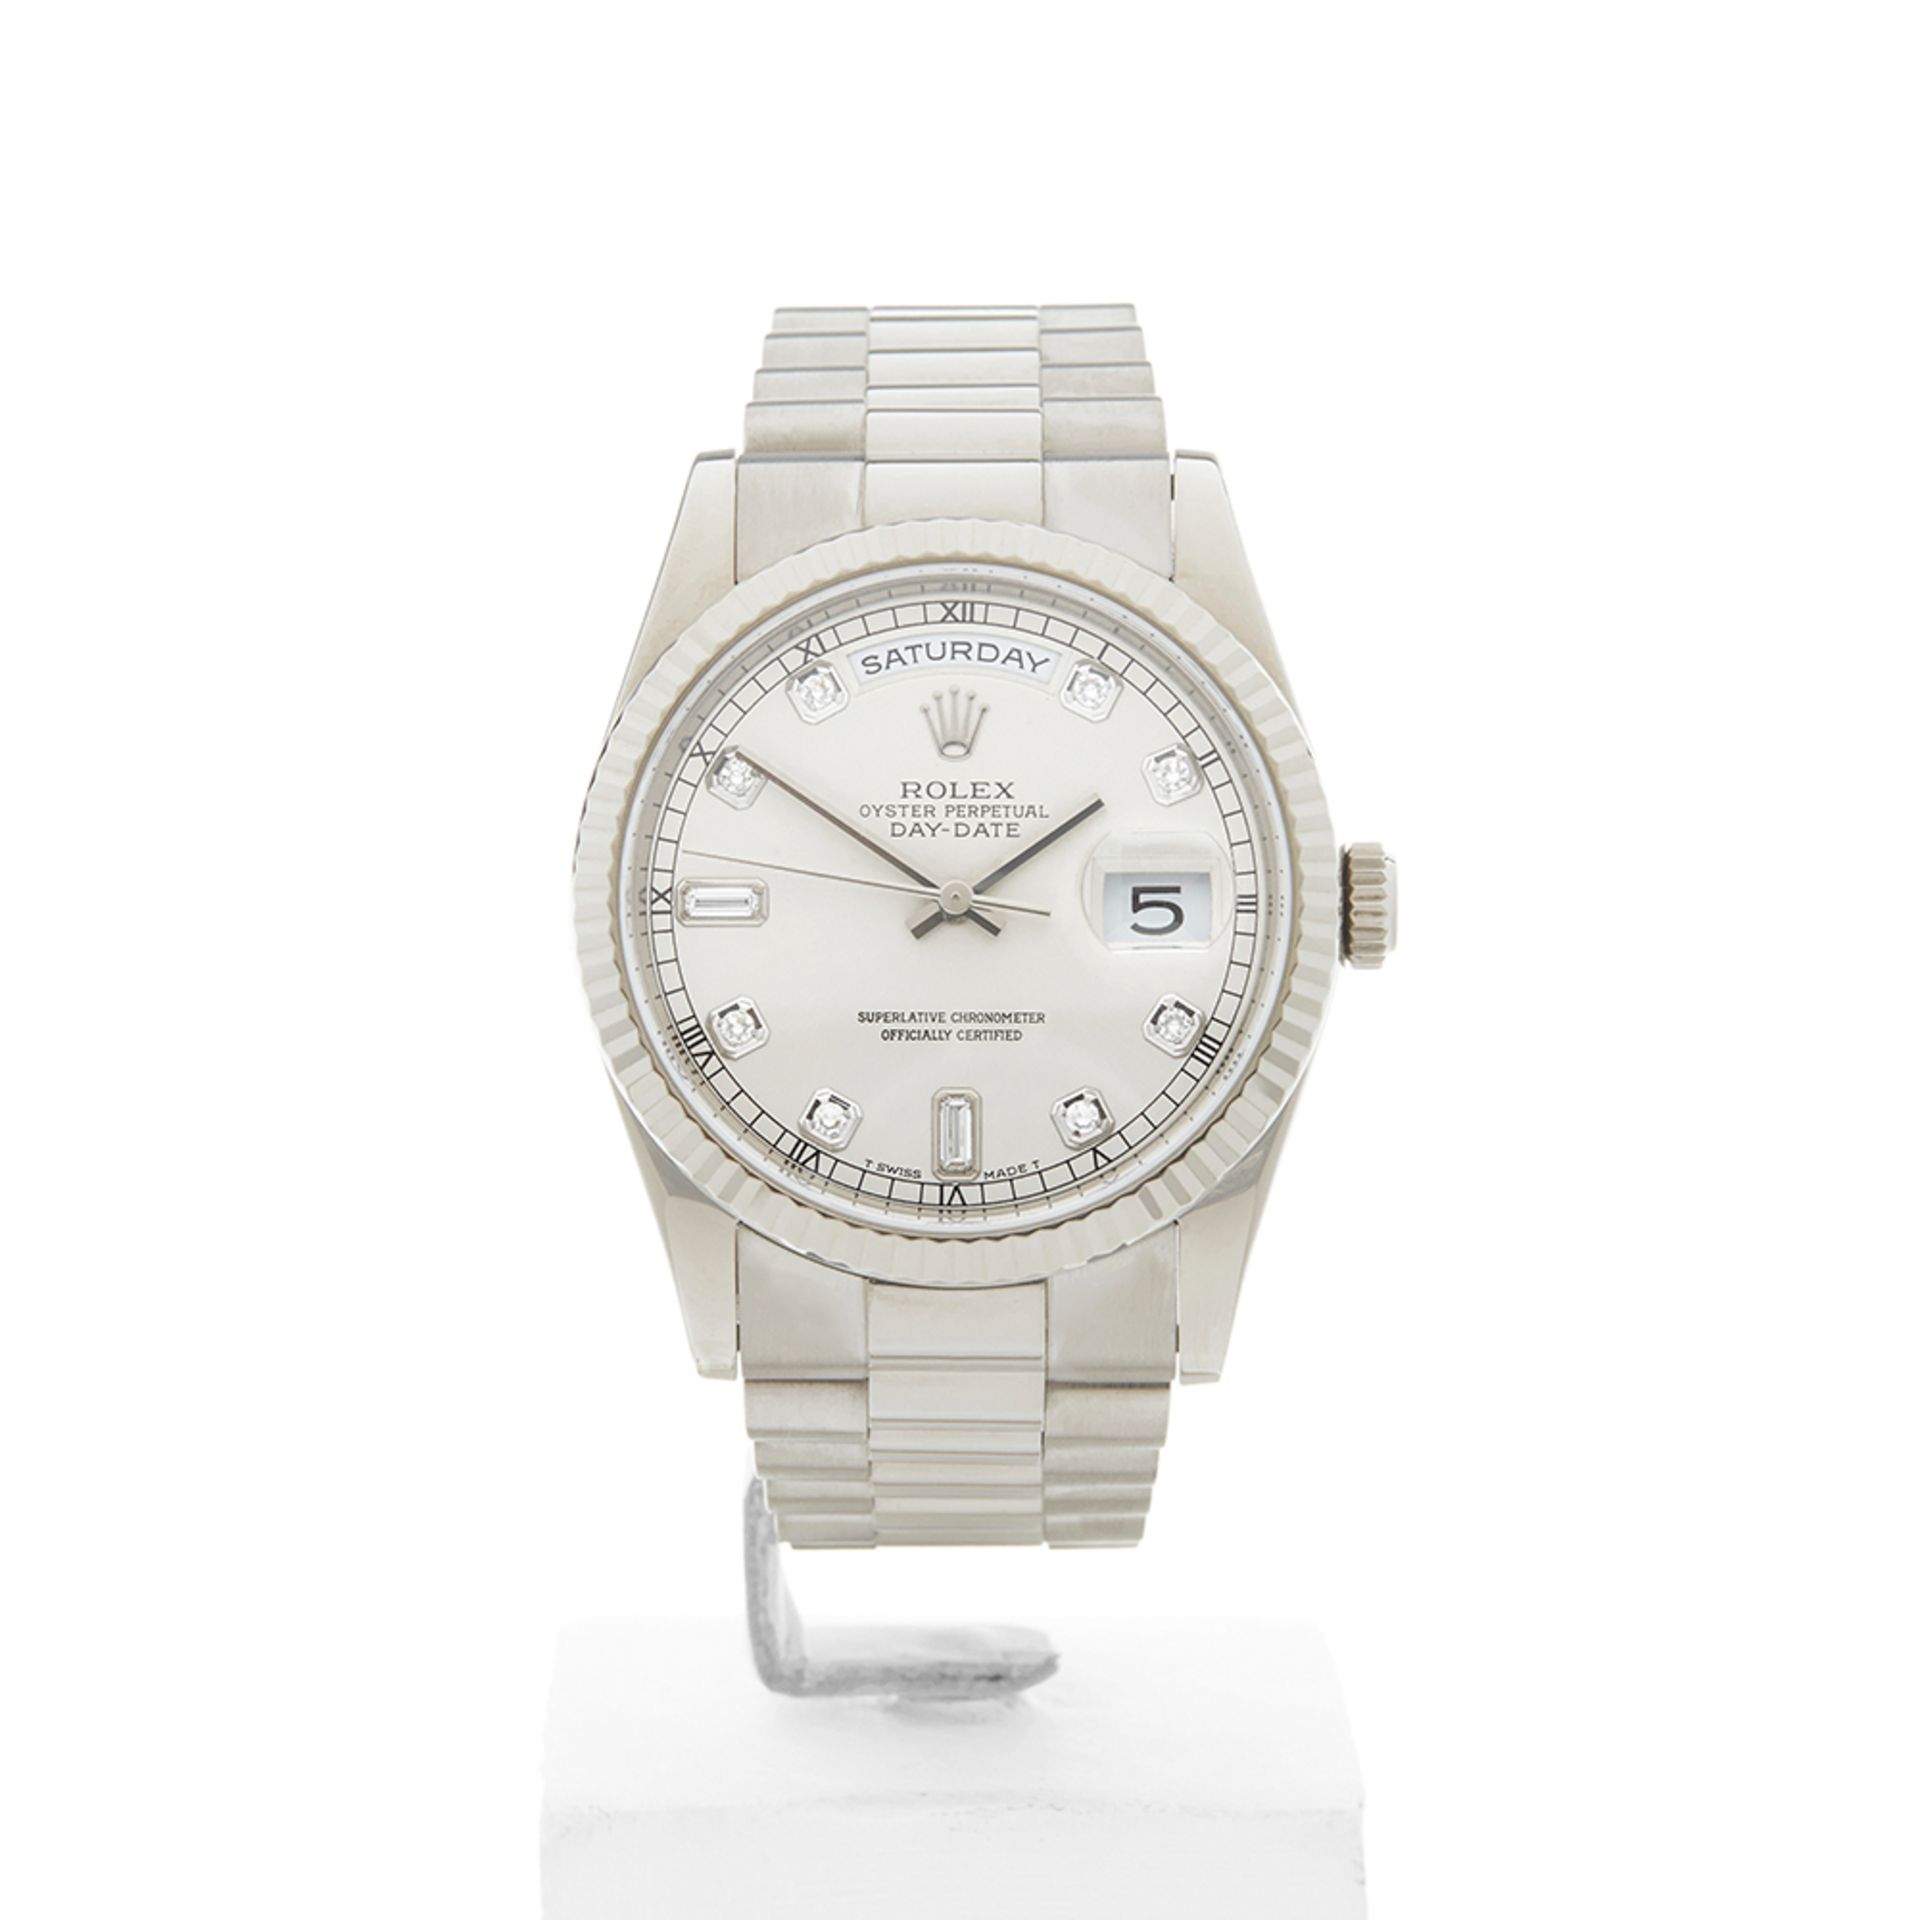 Rolex Day-Date 36mm 18k White Gold 118239 - Image 2 of 9